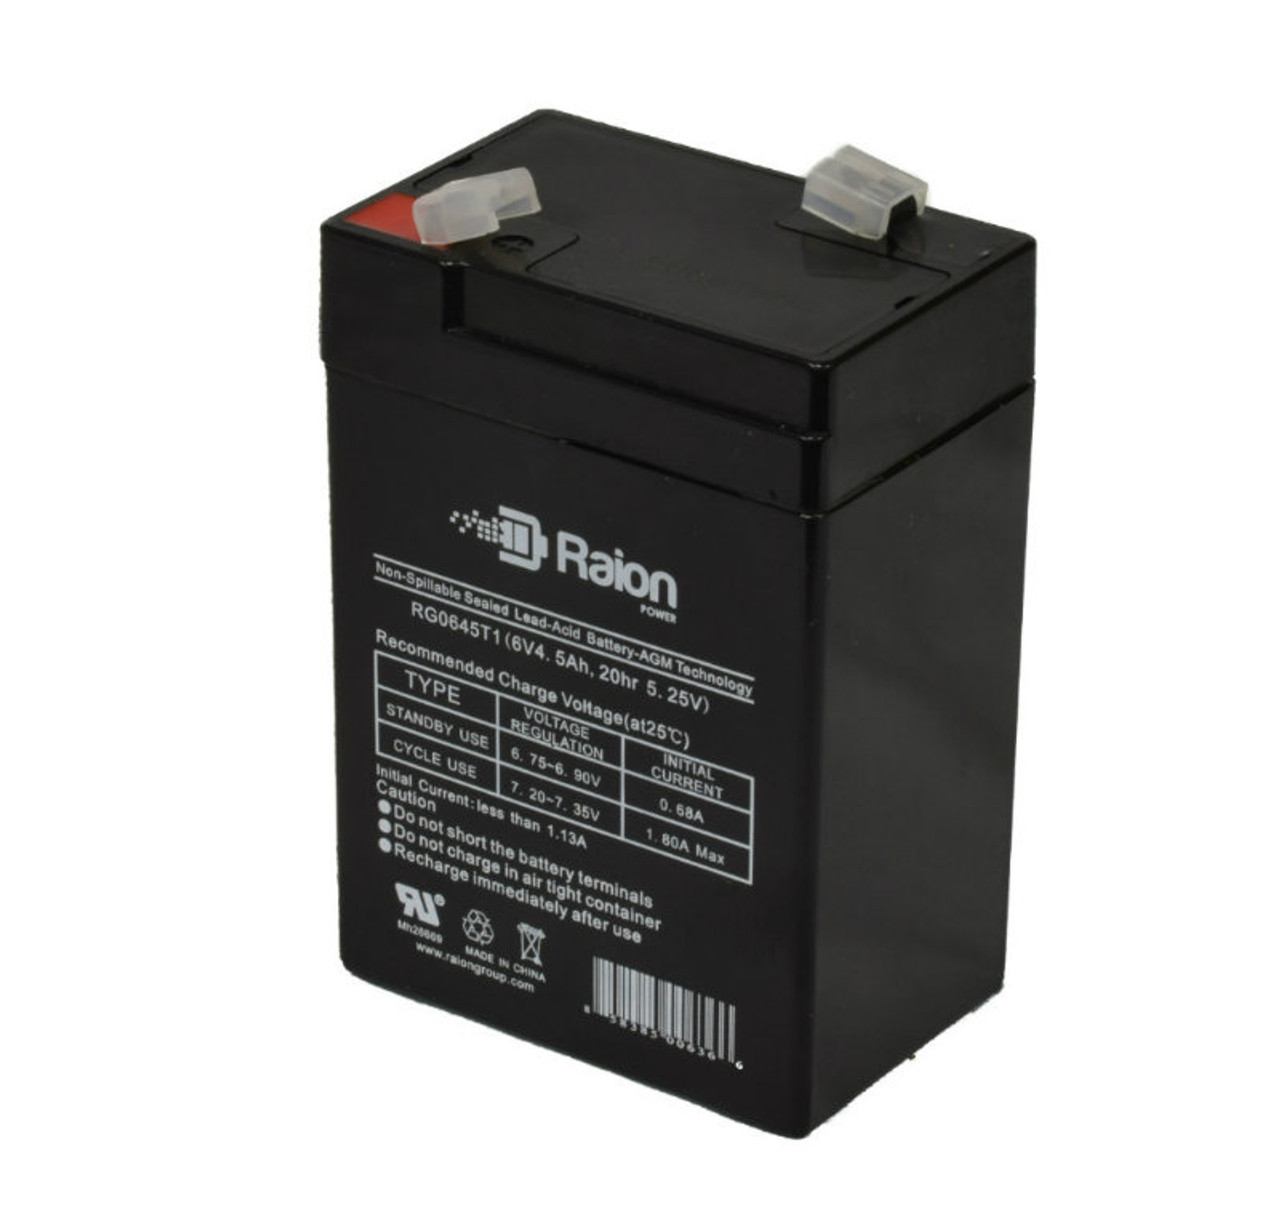 Raion Power RG0645T1 6V 4.5Ah Replacement Battery Cartridge for Light Alarms CE15BK